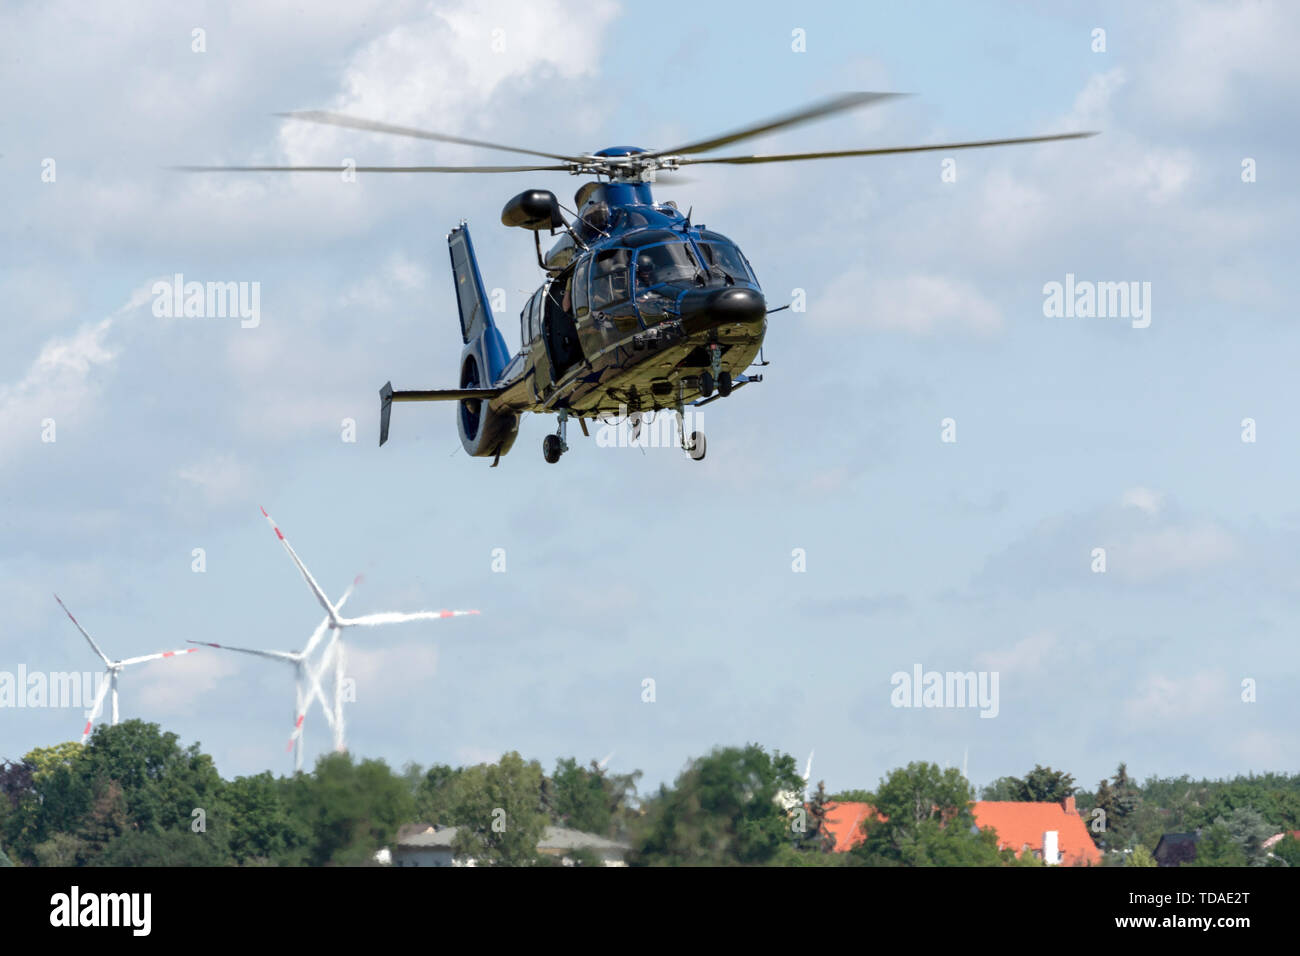 13 June 2019, Saxony, Nünchritz: An EC 155 b1 helicopter lands on a field during a helicopter-assisted water rescue exercise from the Elbe. The Bundespolizei-Fliegerstaffel Blumberg, together with the Wasserwacht Sachsen and the Deutsche Lebens-Rettungs-Gesellschaft e.V. (German Life and Rescue Society), leads the (DLRG) is conducting a joint exercise to rescue people from flowing waters. Photo: Robert Michael/dpa-Zentralbild/ZB Stock Photo